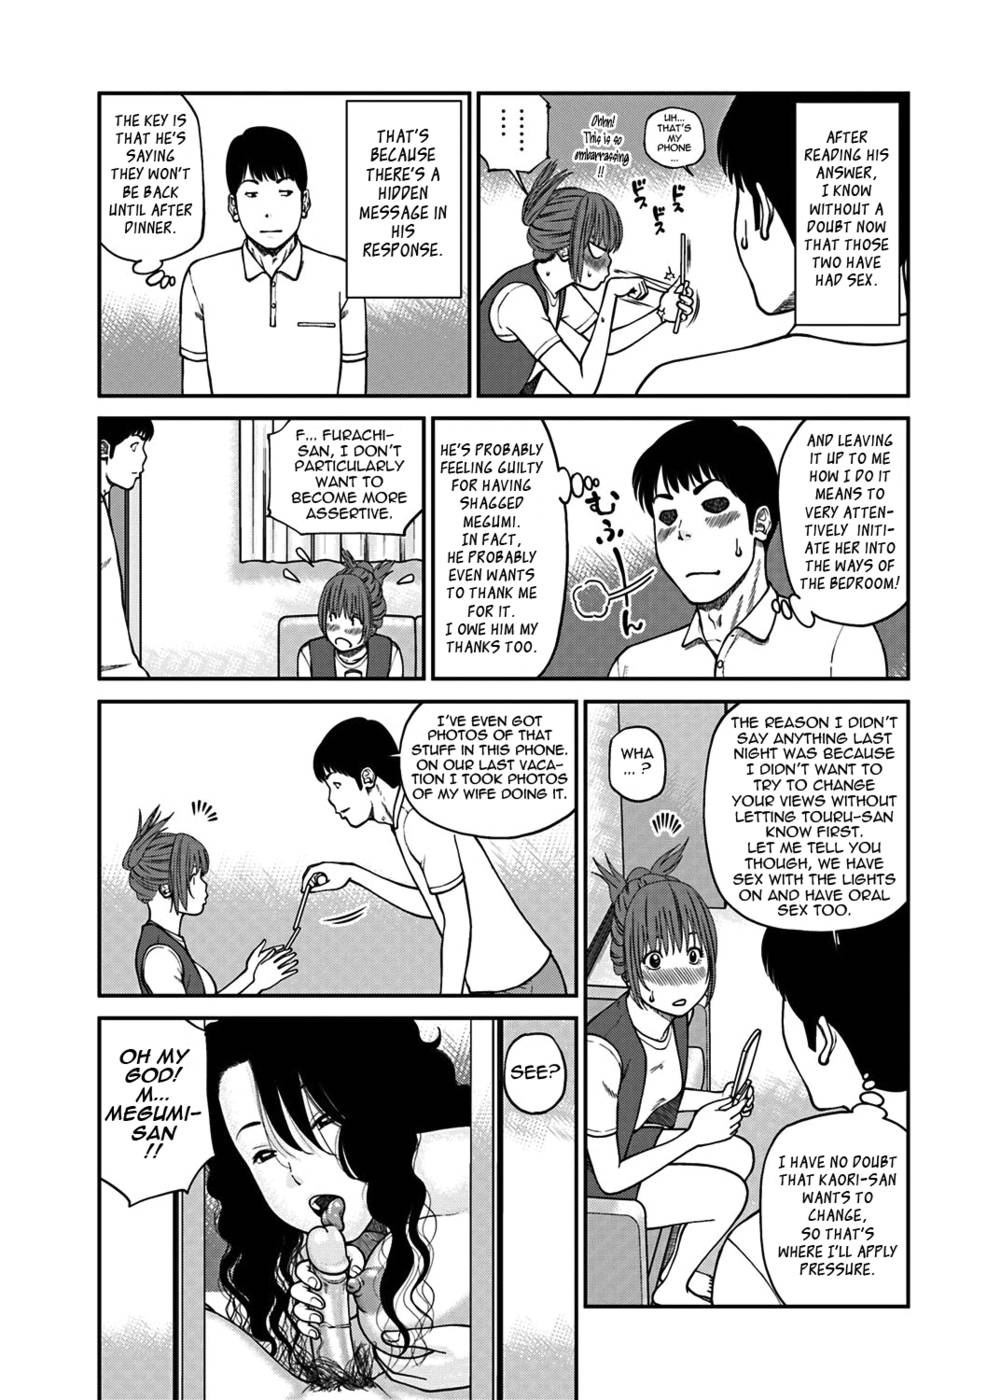 33 Year Old Unsatisfied Wife-Chapter 3-Spouse Swapping-Second Day-Hentai Manga Hentai Comic picture